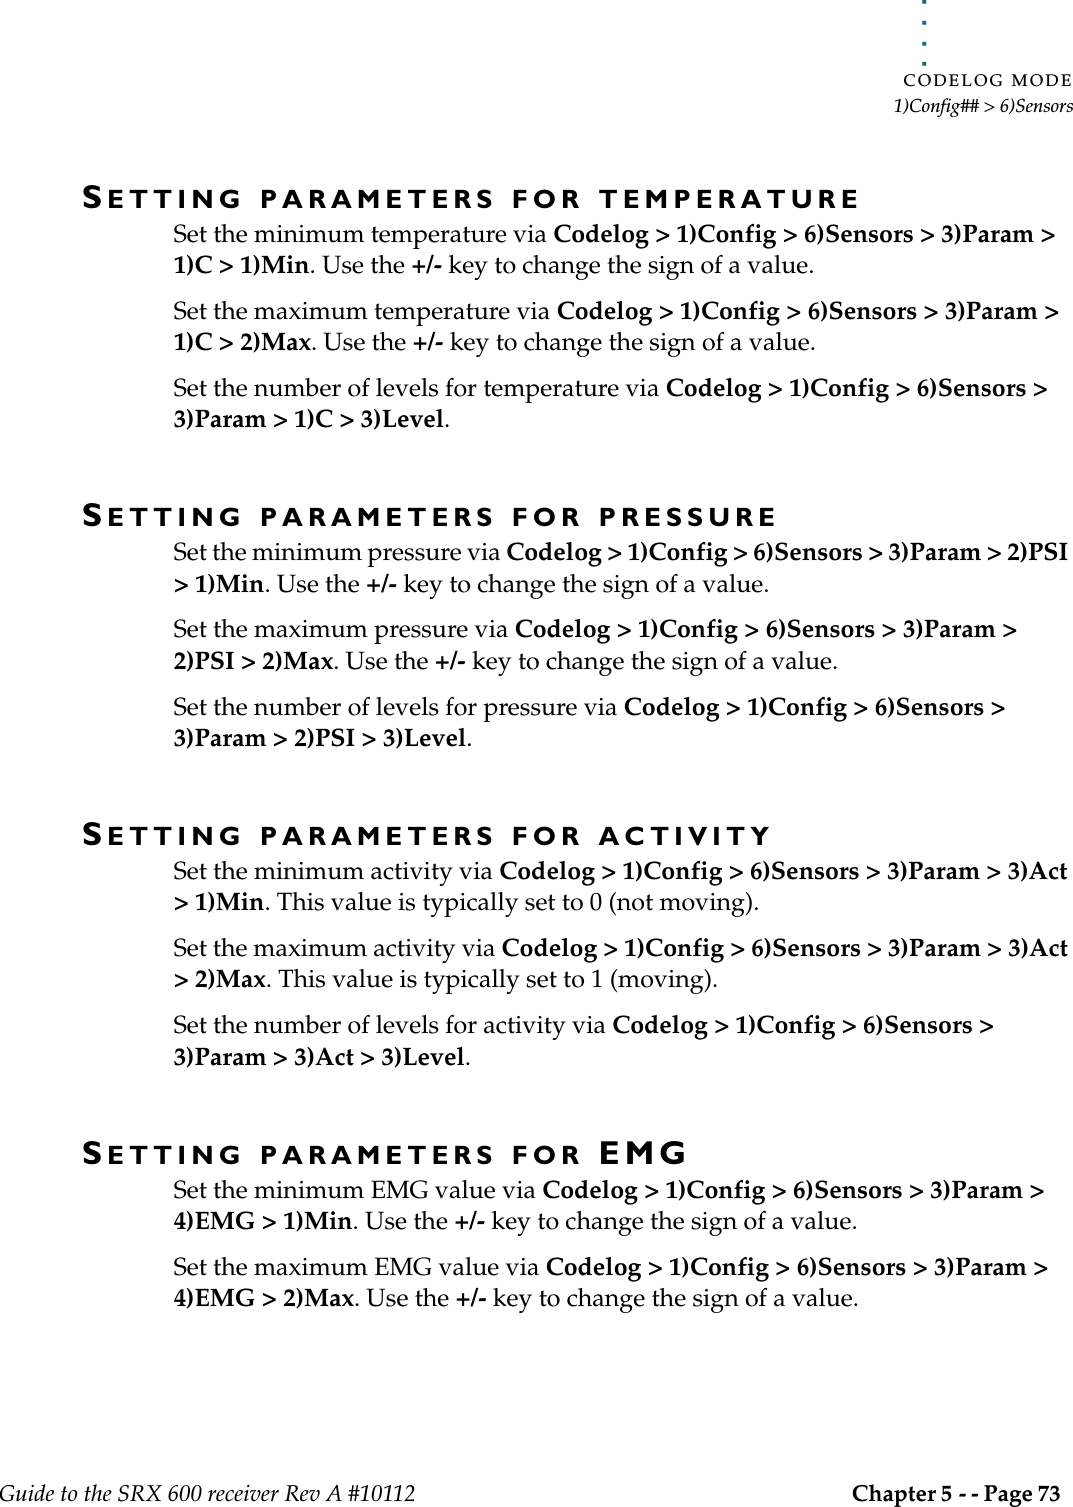 . . . . .CODELOG MODE1)Config## &gt; 6)SensorsGuide to the SRX 600 receiver Rev A #10112 Chapter 5 - - Page 73 SETTING PARAMETERS FOR TEMPERATURESet the minimum temperature via Codelog &gt; 1)Config &gt; 6)Sensors &gt; 3)Param &gt; 1)C &gt; 1)Min. Use the +/- key to change the sign of a value.Set the maximum temperature via Codelog &gt; 1)Config &gt; 6)Sensors &gt; 3)Param &gt; 1)C &gt; 2)Max. Use the +/- key to change the sign of a value.Set the number of levels for temperature via Codelog &gt; 1)Config &gt; 6)Sensors &gt; 3)Param &gt; 1)C &gt; 3)Level. SETTING PARAMETERS FOR PRESSURESet the minimum pressure via Codelog &gt; 1)Config &gt; 6)Sensors &gt; 3)Param &gt; 2)PSI &gt; 1)Min. Use the +/- key to change the sign of a value.Set the maximum pressure via Codelog &gt; 1)Config &gt; 6)Sensors &gt; 3)Param &gt; 2)PSI &gt; 2)Max. Use the +/- key to change the sign of a value.Set the number of levels for pressure via Codelog &gt; 1)Config &gt; 6)Sensors &gt; 3)Param &gt; 2)PSI &gt; 3)Level. SETTING PARAMETERS FOR ACTIVITYSet the minimum activity via Codelog &gt; 1)Config &gt; 6)Sensors &gt; 3)Param &gt; 3)Act &gt; 1)Min. This value is typically set to 0 (not moving).Set the maximum activity via Codelog &gt; 1)Config &gt; 6)Sensors &gt; 3)Param &gt; 3)Act &gt; 2)Max. This value is typically set to 1 (moving).Set the number of levels for activity via Codelog &gt; 1)Config &gt; 6)Sensors &gt; 3)Param &gt; 3)Act &gt; 3)Level. SETTING PARAMETERS FOR EMGSet the minimum EMG value via Codelog &gt; 1)Config &gt; 6)Sensors &gt; 3)Param &gt; 4)EMG &gt; 1)Min. Use the +/- key to change the sign of a value.Set the maximum EMG value via Codelog &gt; 1)Config &gt; 6)Sensors &gt; 3)Param &gt; 4)EMG &gt; 2)Max. Use the +/- key to change the sign of a value.